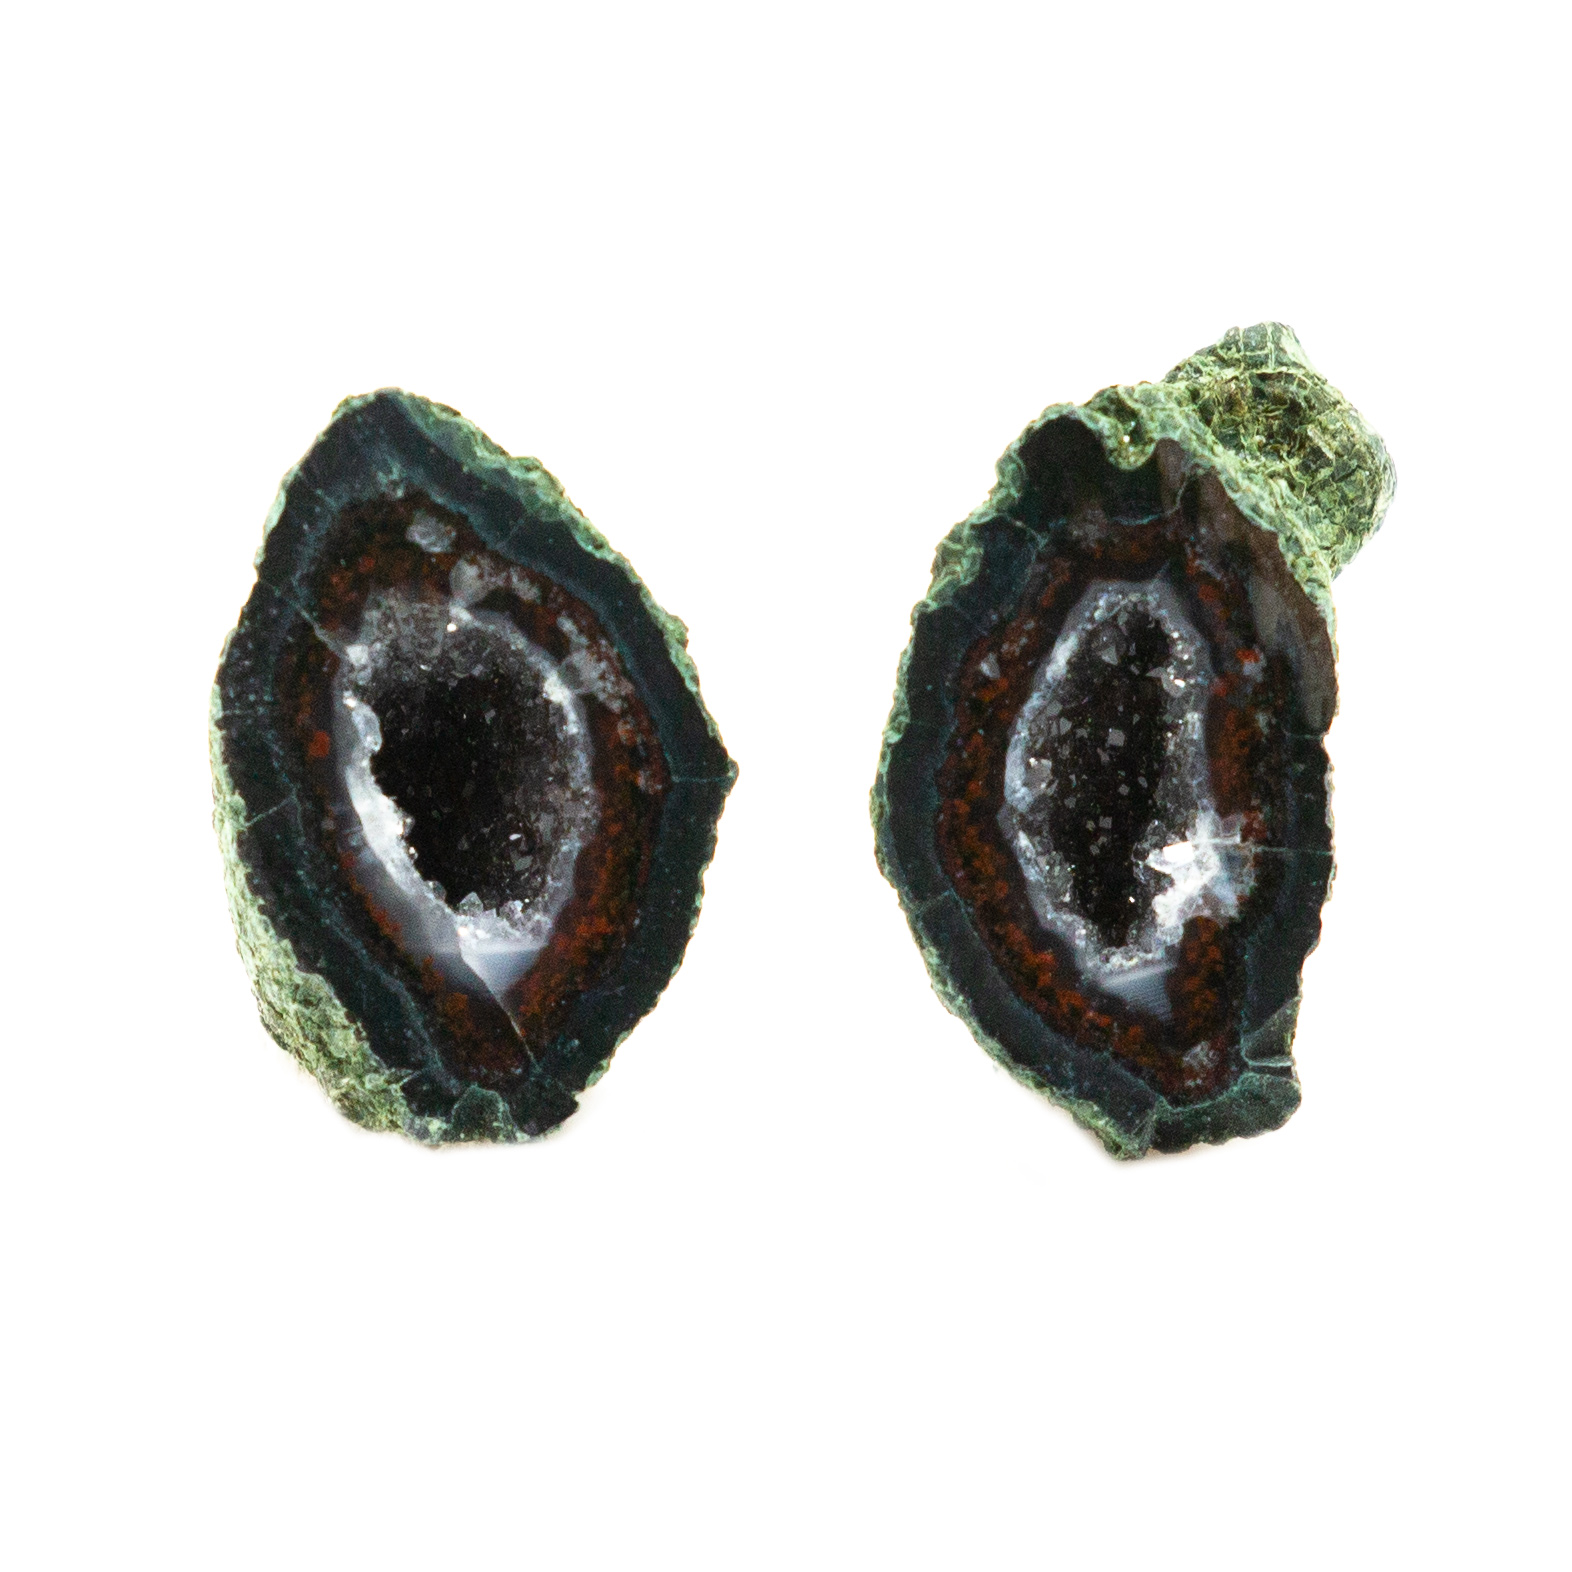 The Gem Shop - A new shipment of Tabasco Geodes have